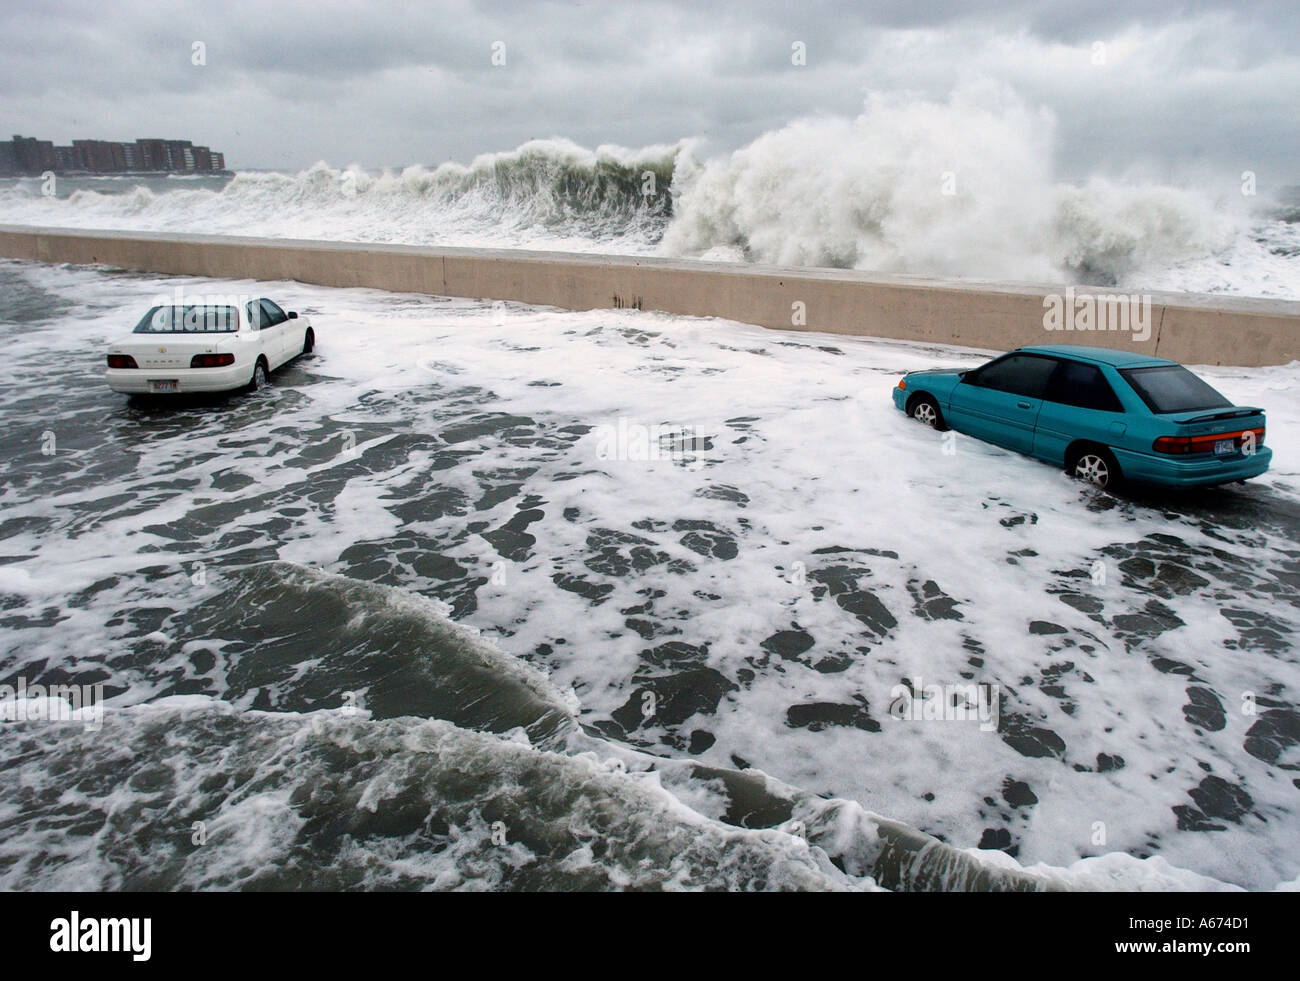 Vehicles are stalled in flood waters as giant waves crash on a seawall during a winter storm in Massachusetts Stock Photo